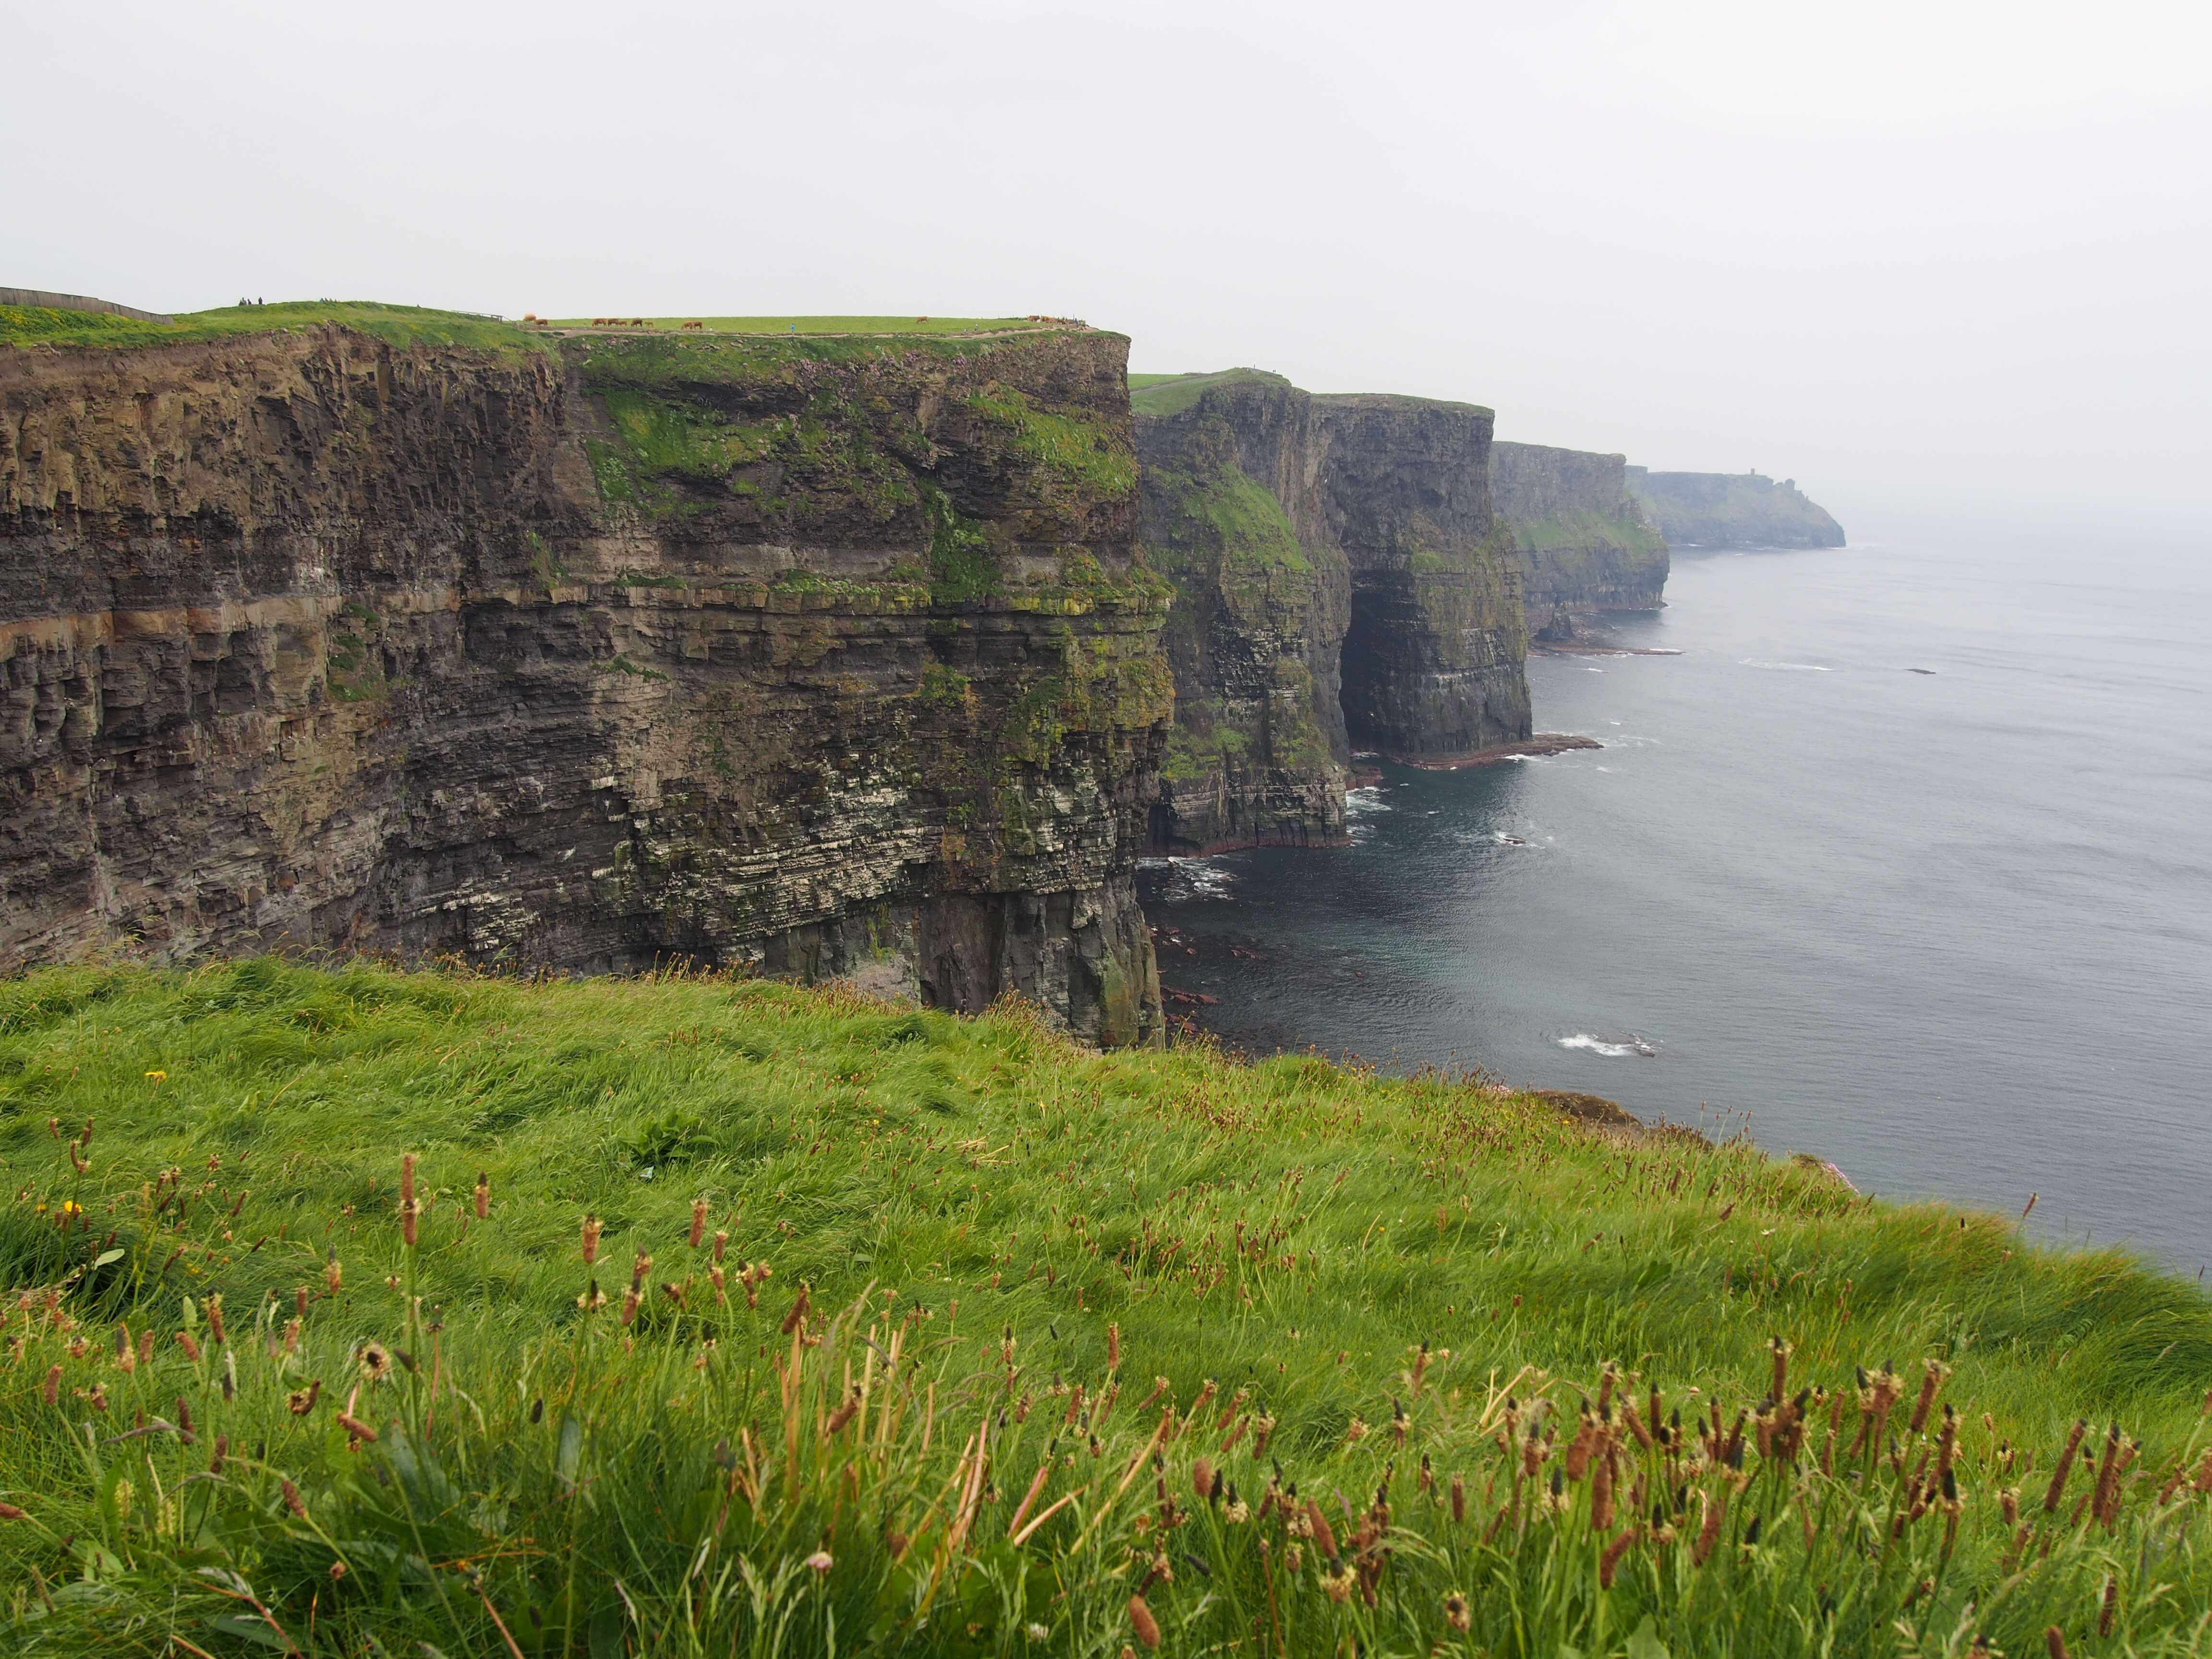 Visiting the Cliffs of Moher with kids